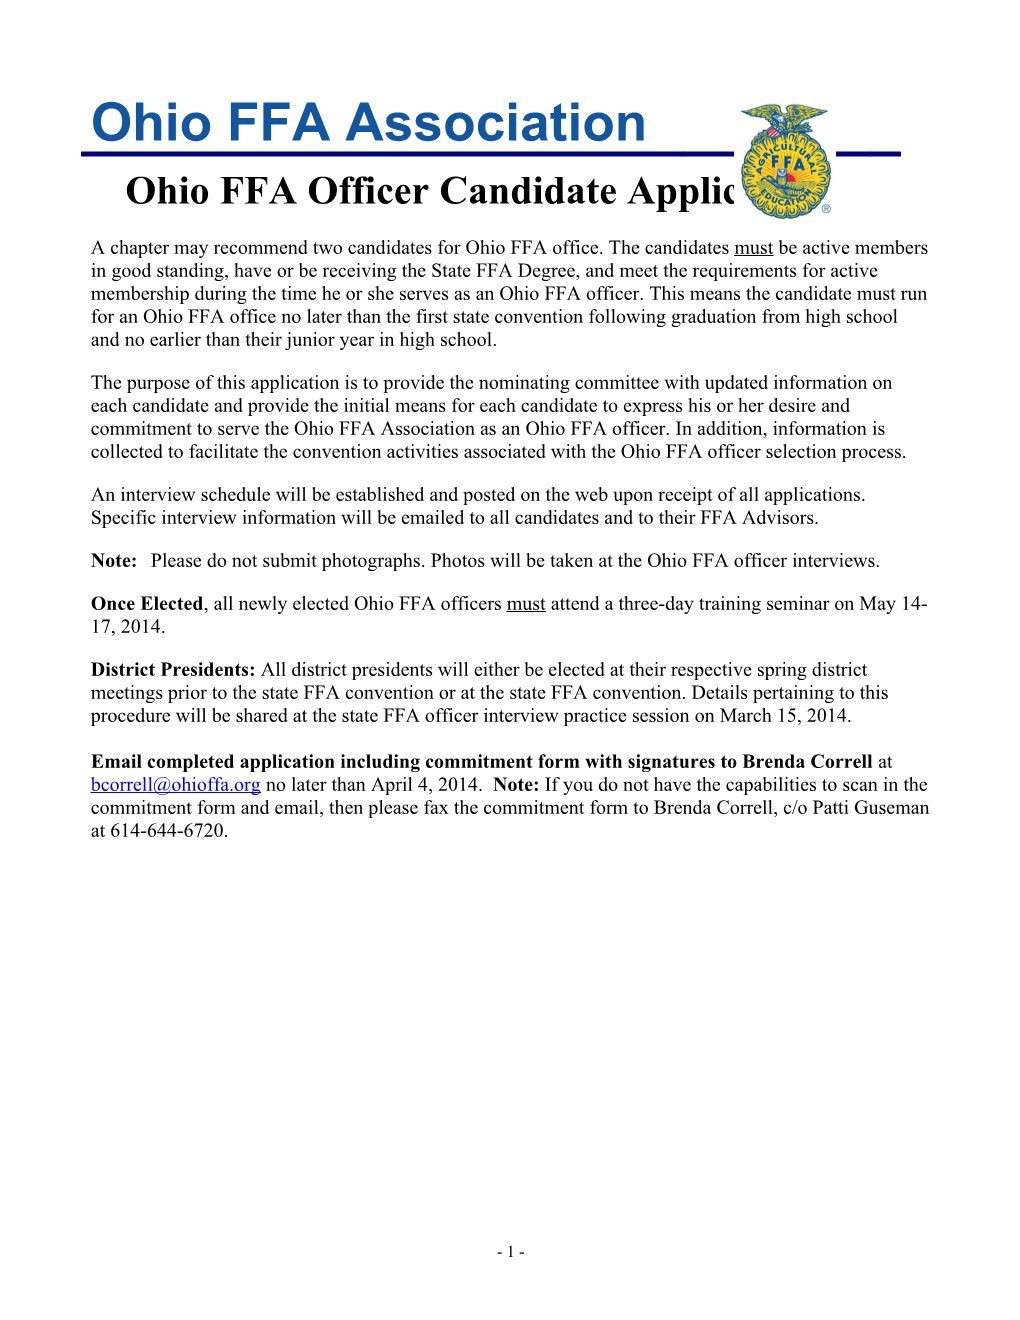 The Purpose of This Application Is to Provide the Nominating Committee with Updated Information